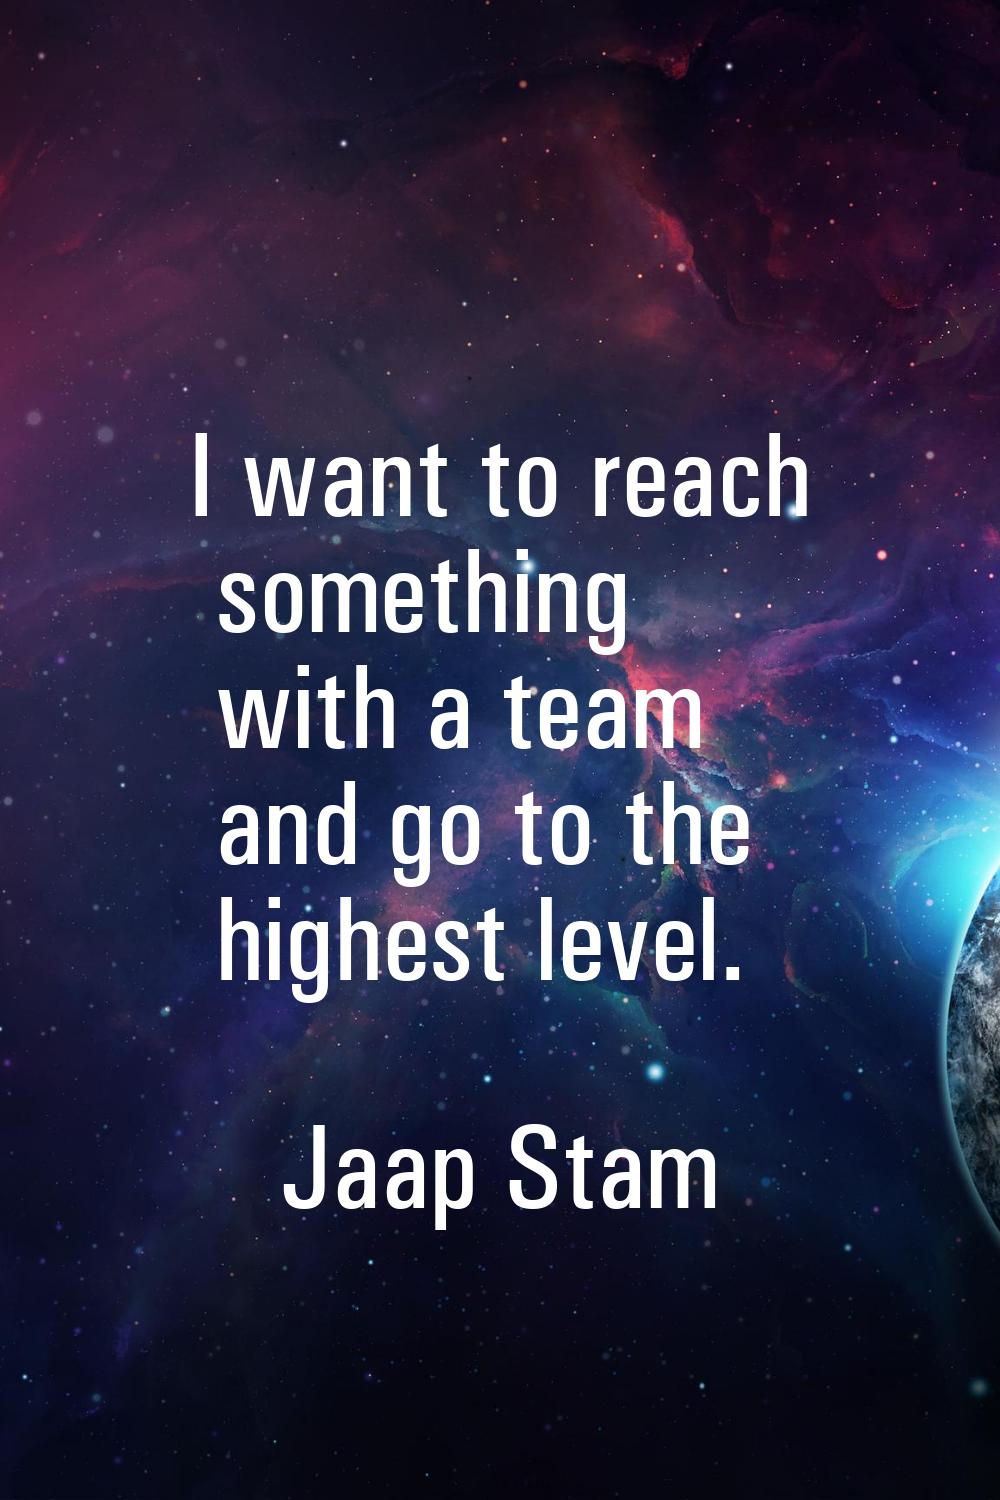 I want to reach something with a team and go to the highest level.